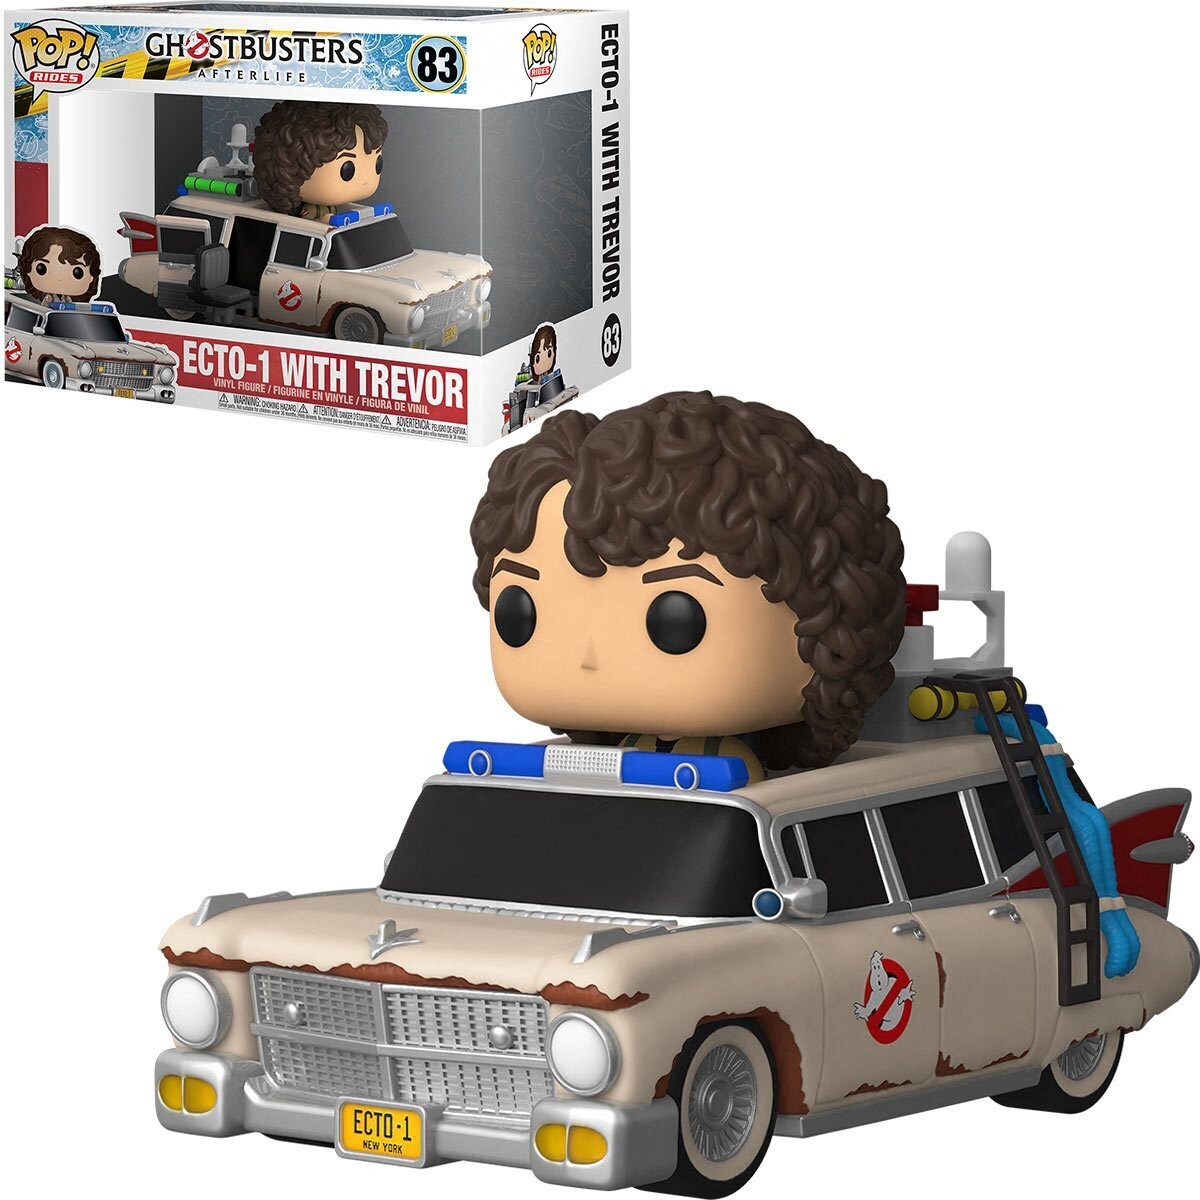 Funko Ghostbusters 3: Afterlife Ecto-1 Pop! Vehicle